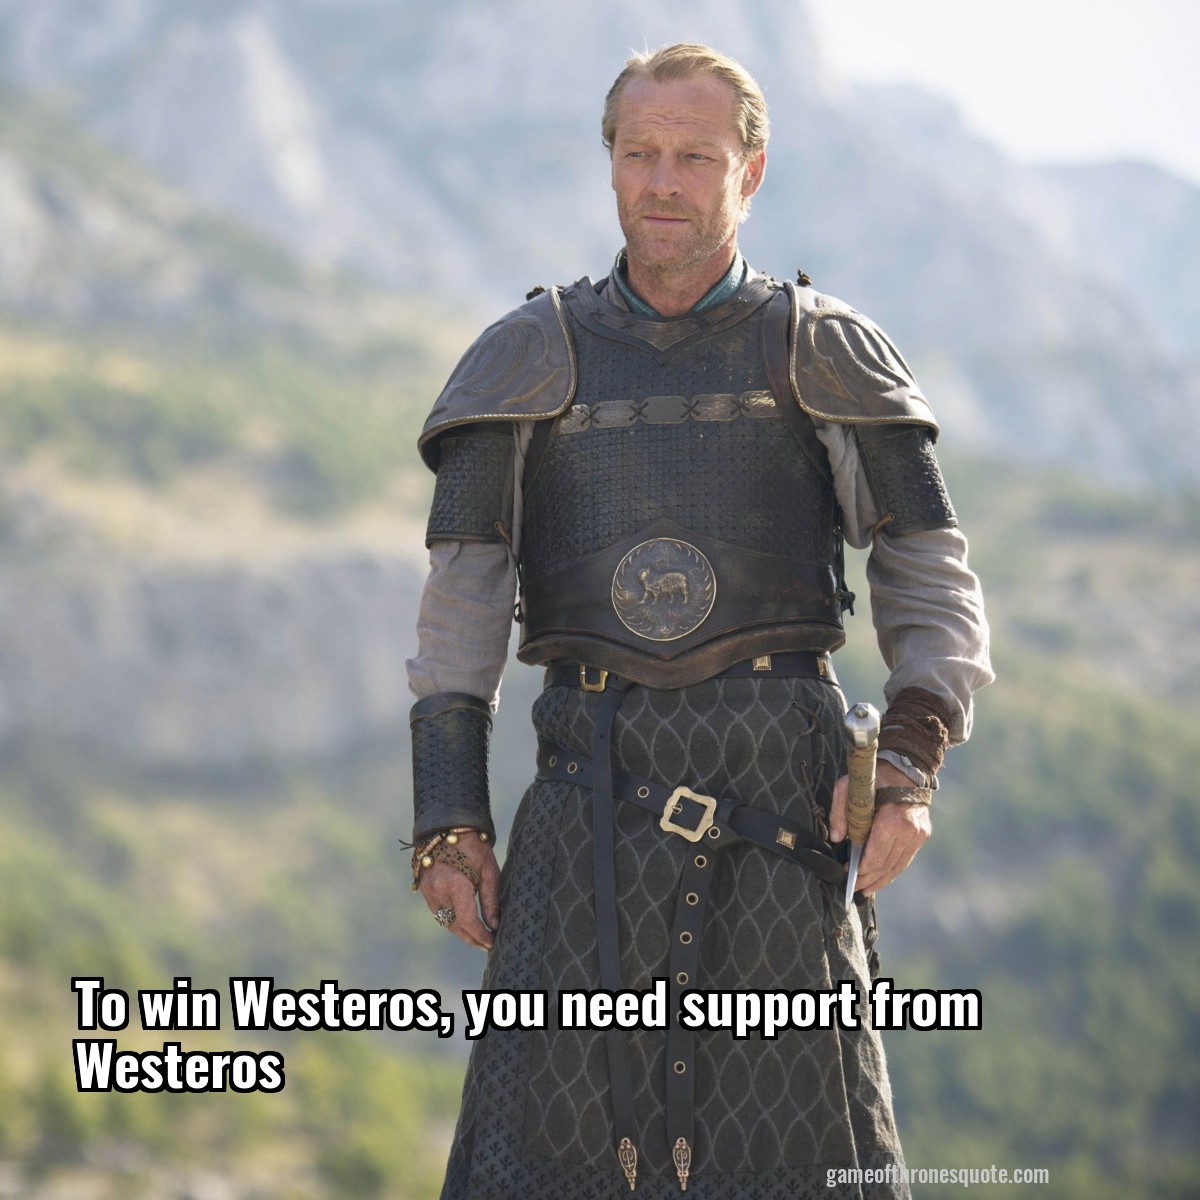 To win Westeros, you need support from Westeros